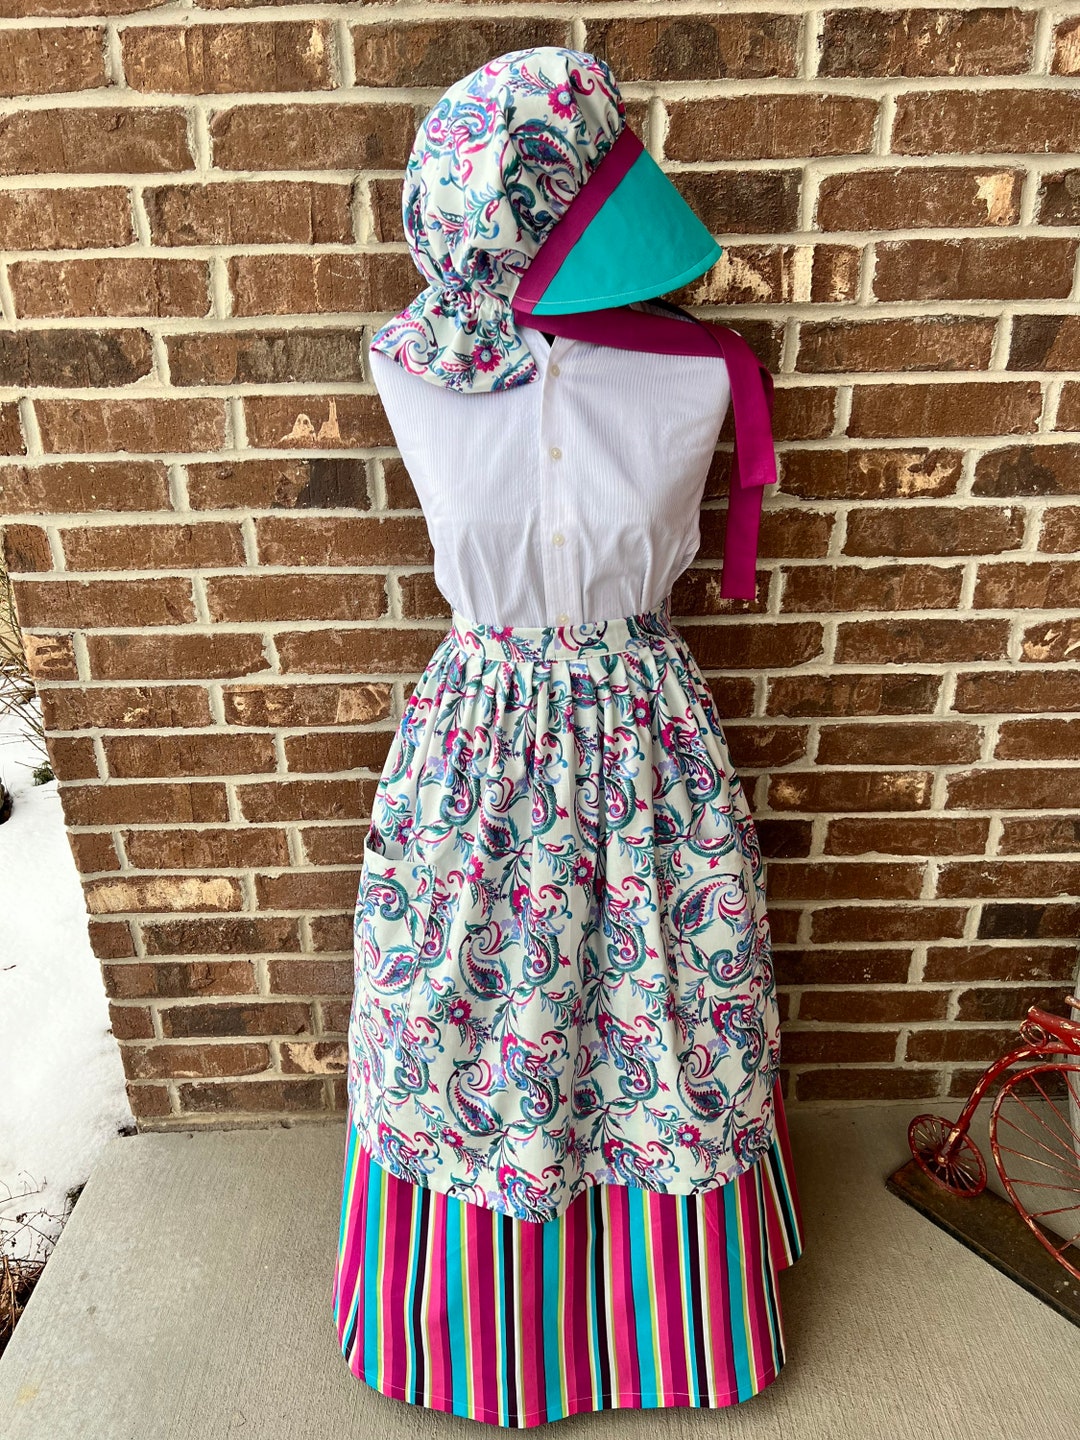 3-piece Pioneer Set With Gathered Apron Bonnet Skirt, Pioneer Costume ...